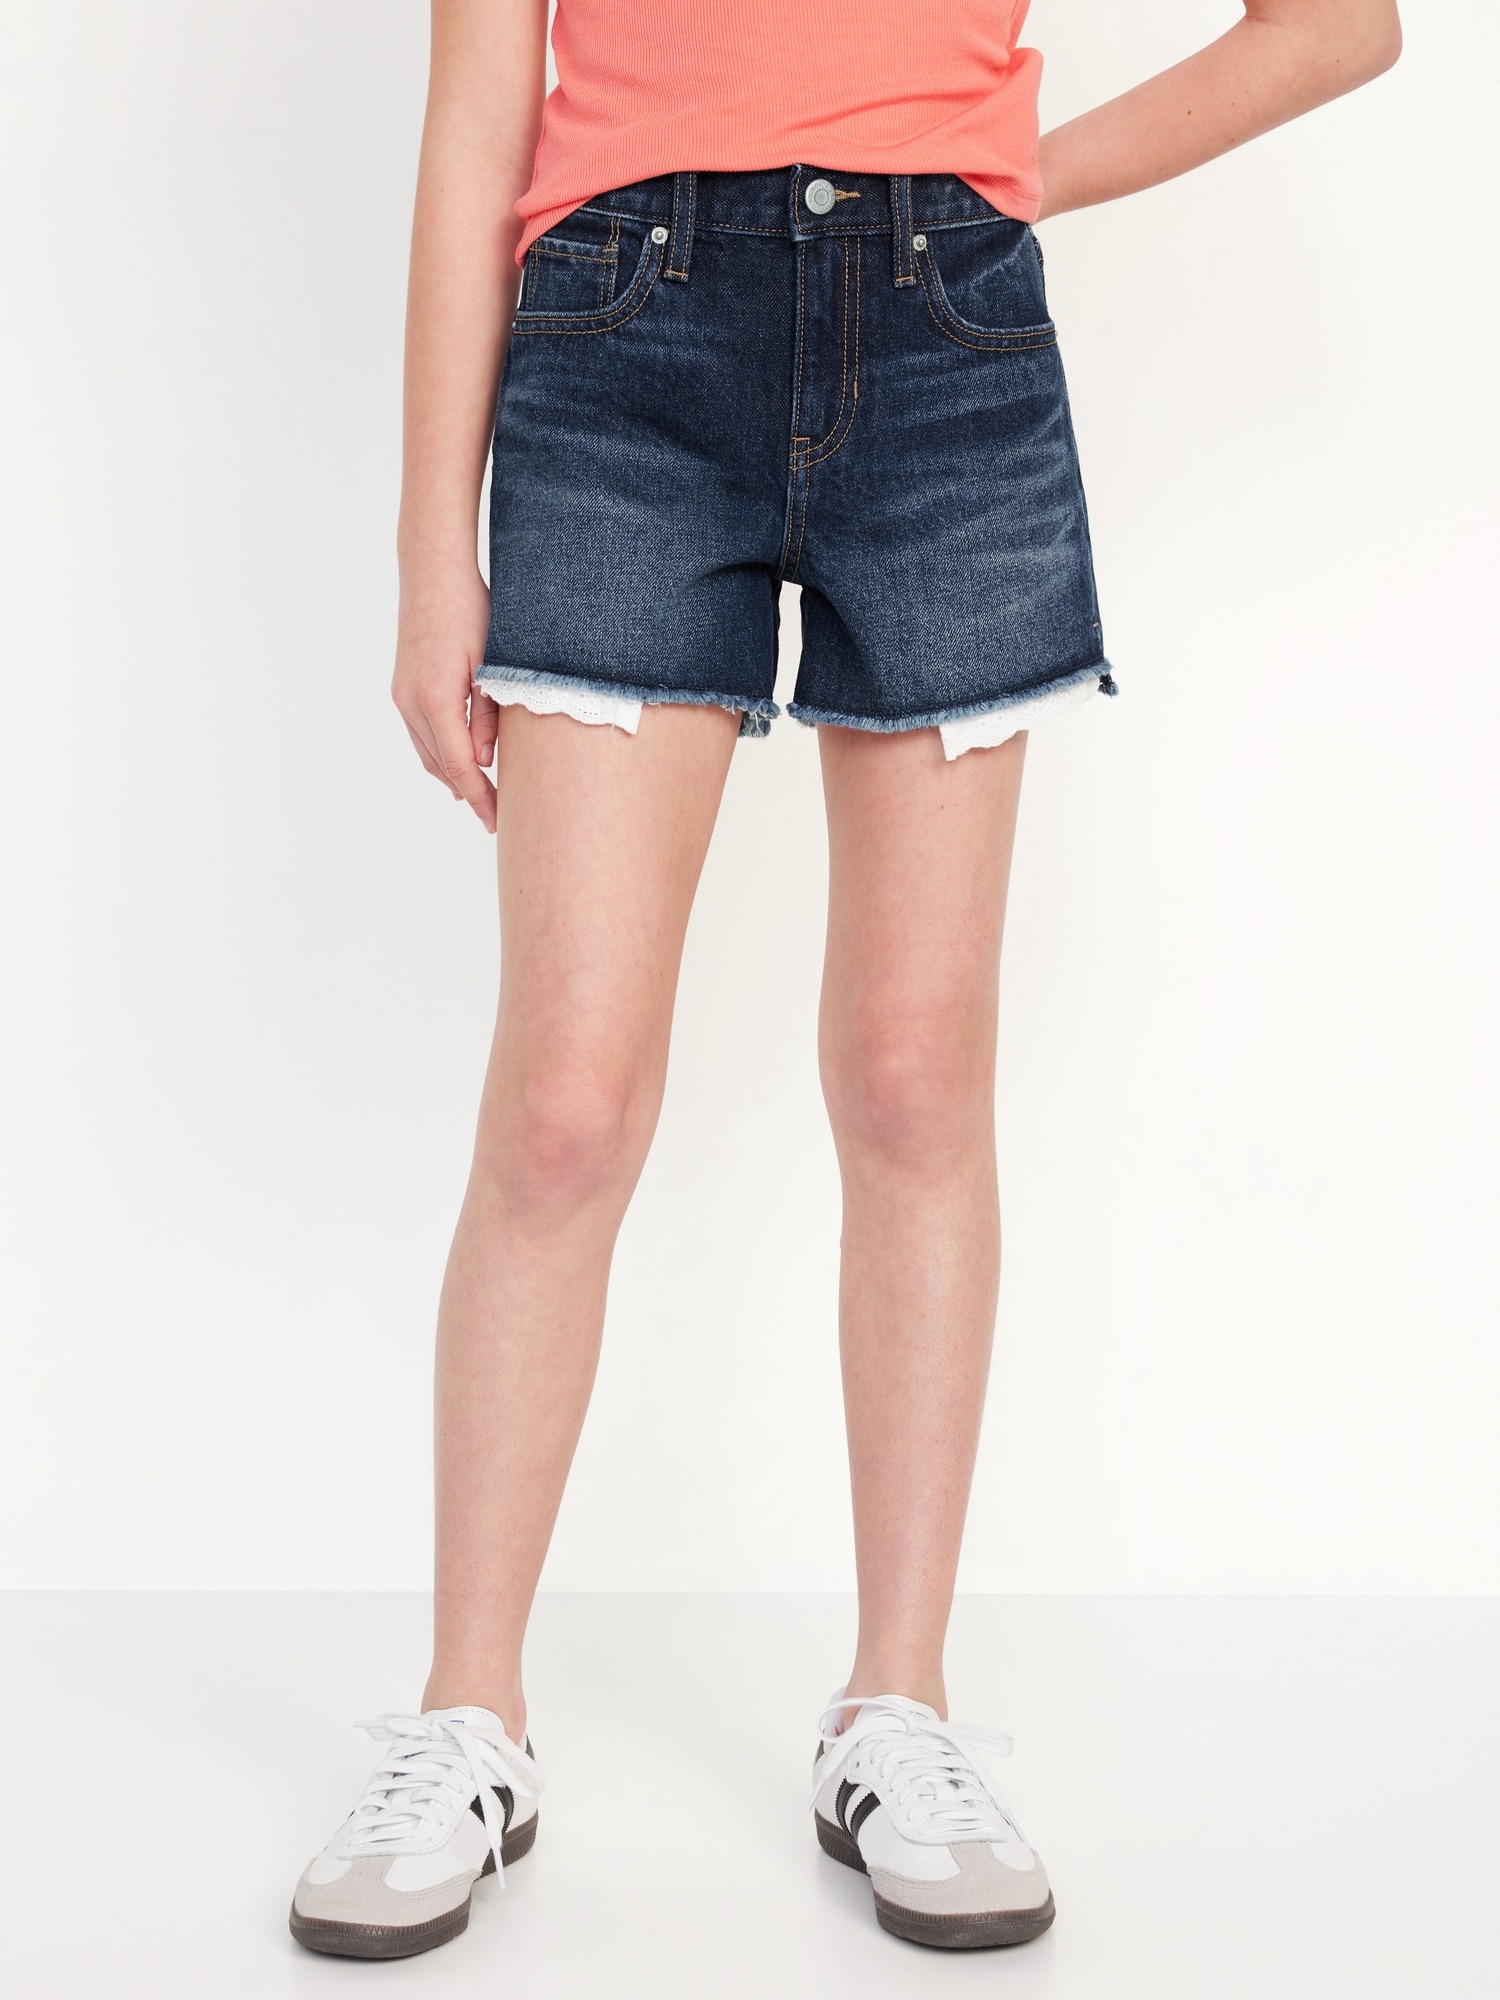 High-Waisted Ripped Jean Shorts for Girls Hot Deal